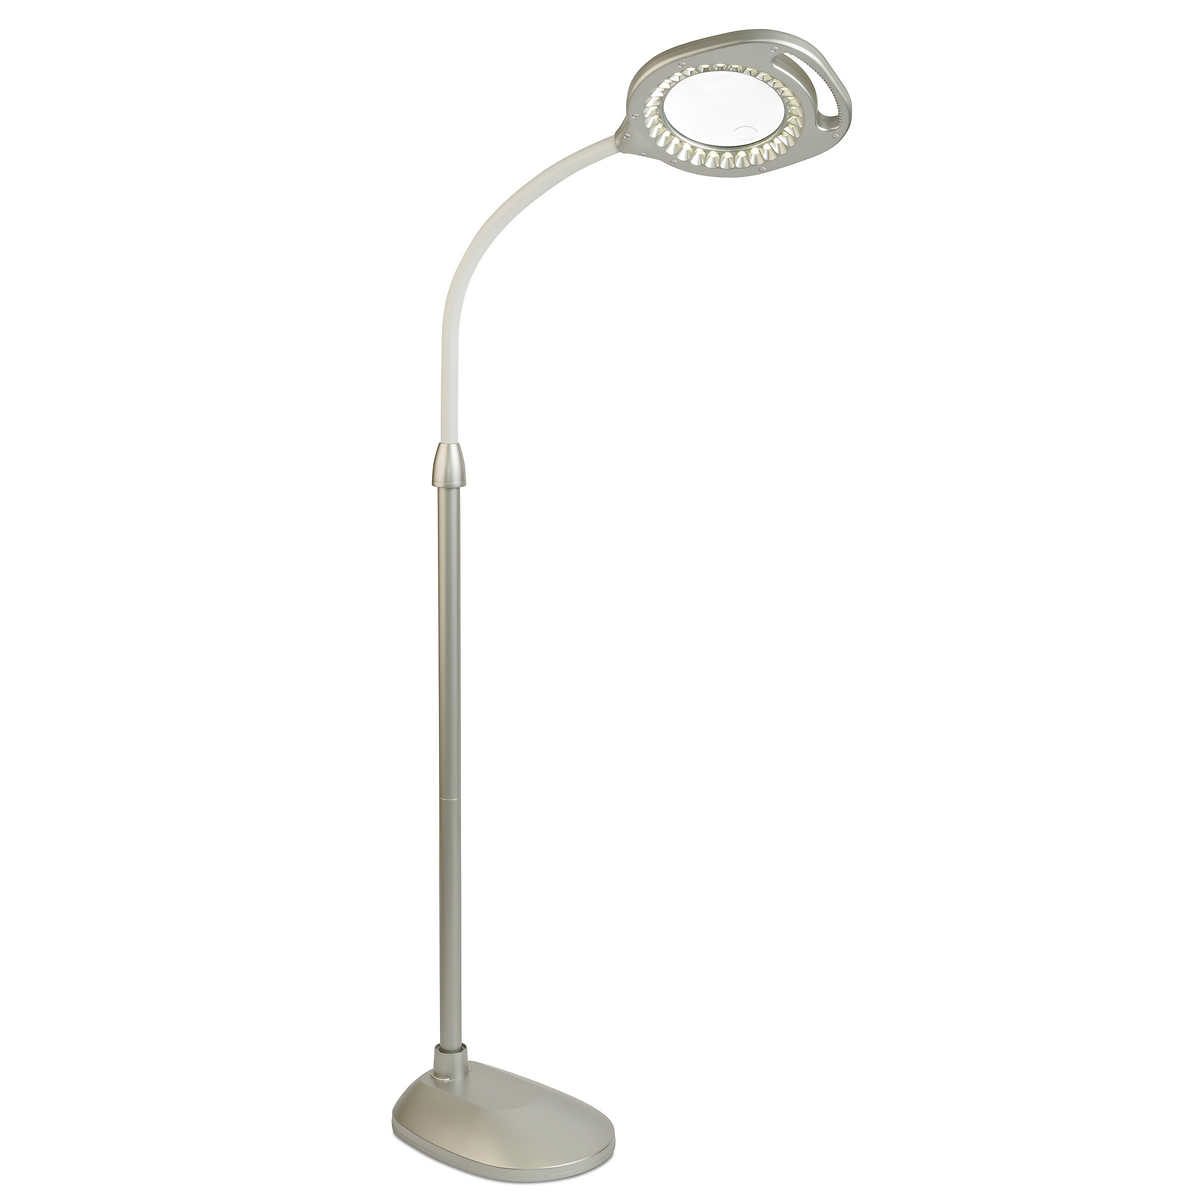 OttLite 48 in. White Dimmable LED Floor Lamp with Magnifier